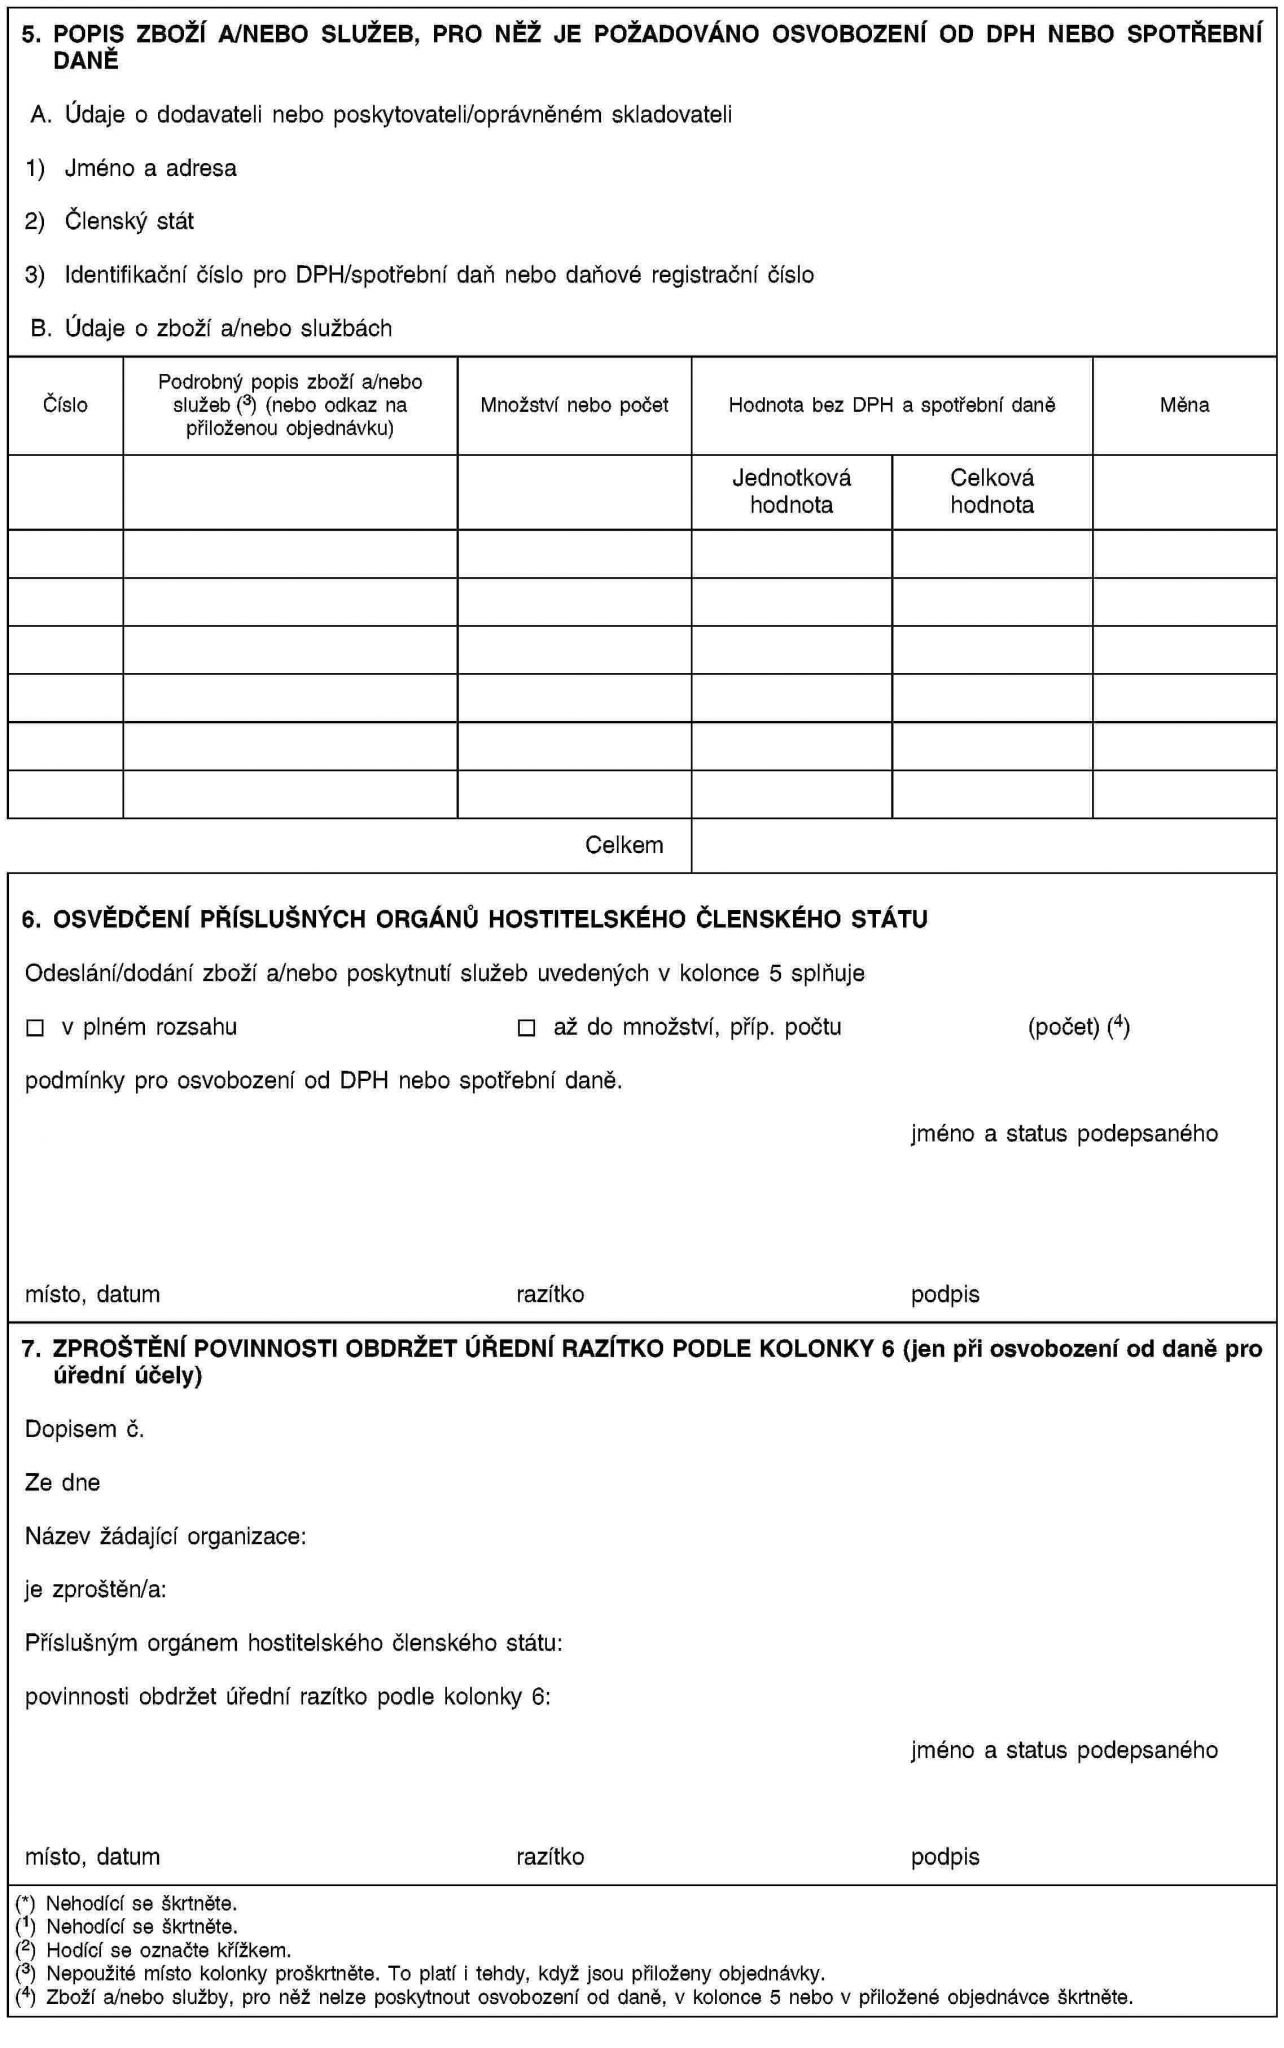 Light Refraction And Lenses Physics Classroom Worksheet Answers Throughout Light Refraction And Lenses Physics Classroom Worksheet Answers